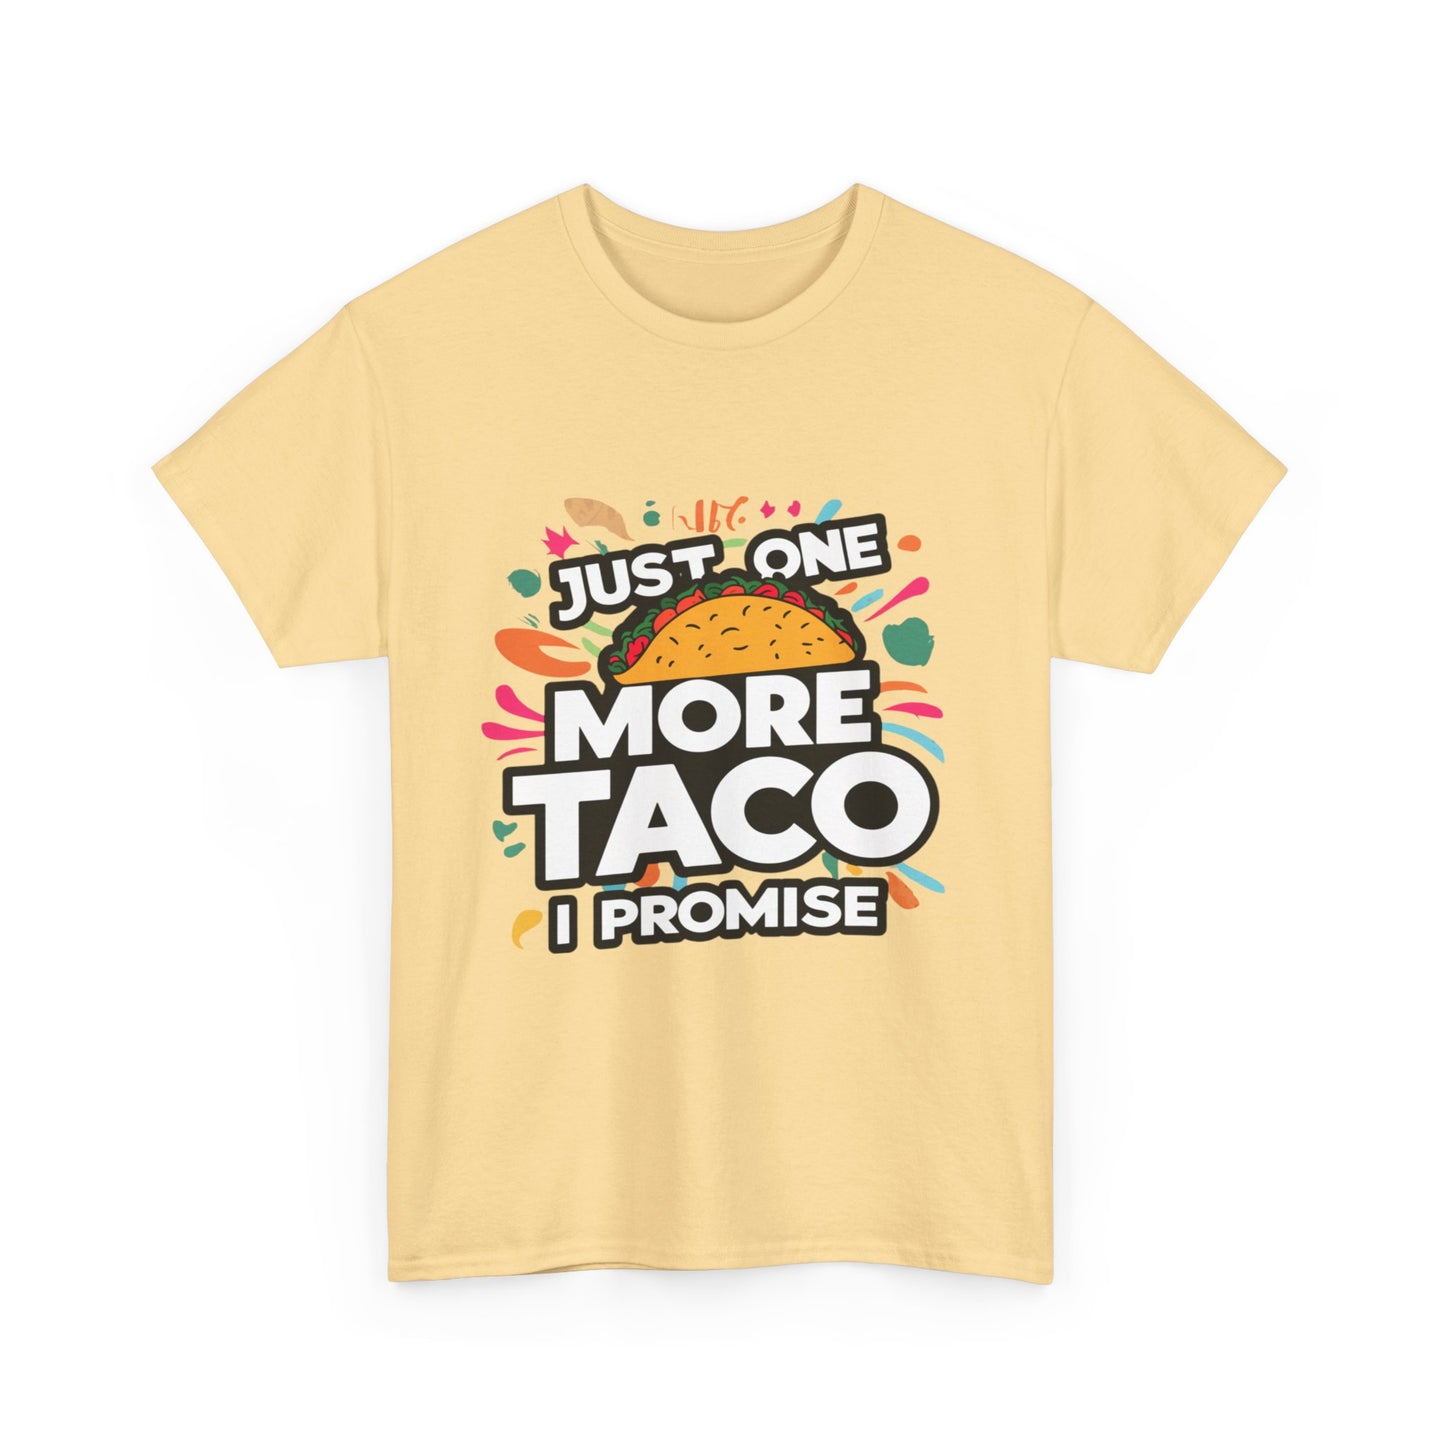 Just One More Taco I Promise Mexican Food Graphic Unisex Heavy Cotton Tee Cotton Funny Humorous Graphic Soft Premium Unisex Men Women Yellow Haze T-shirt Birthday Gift-45